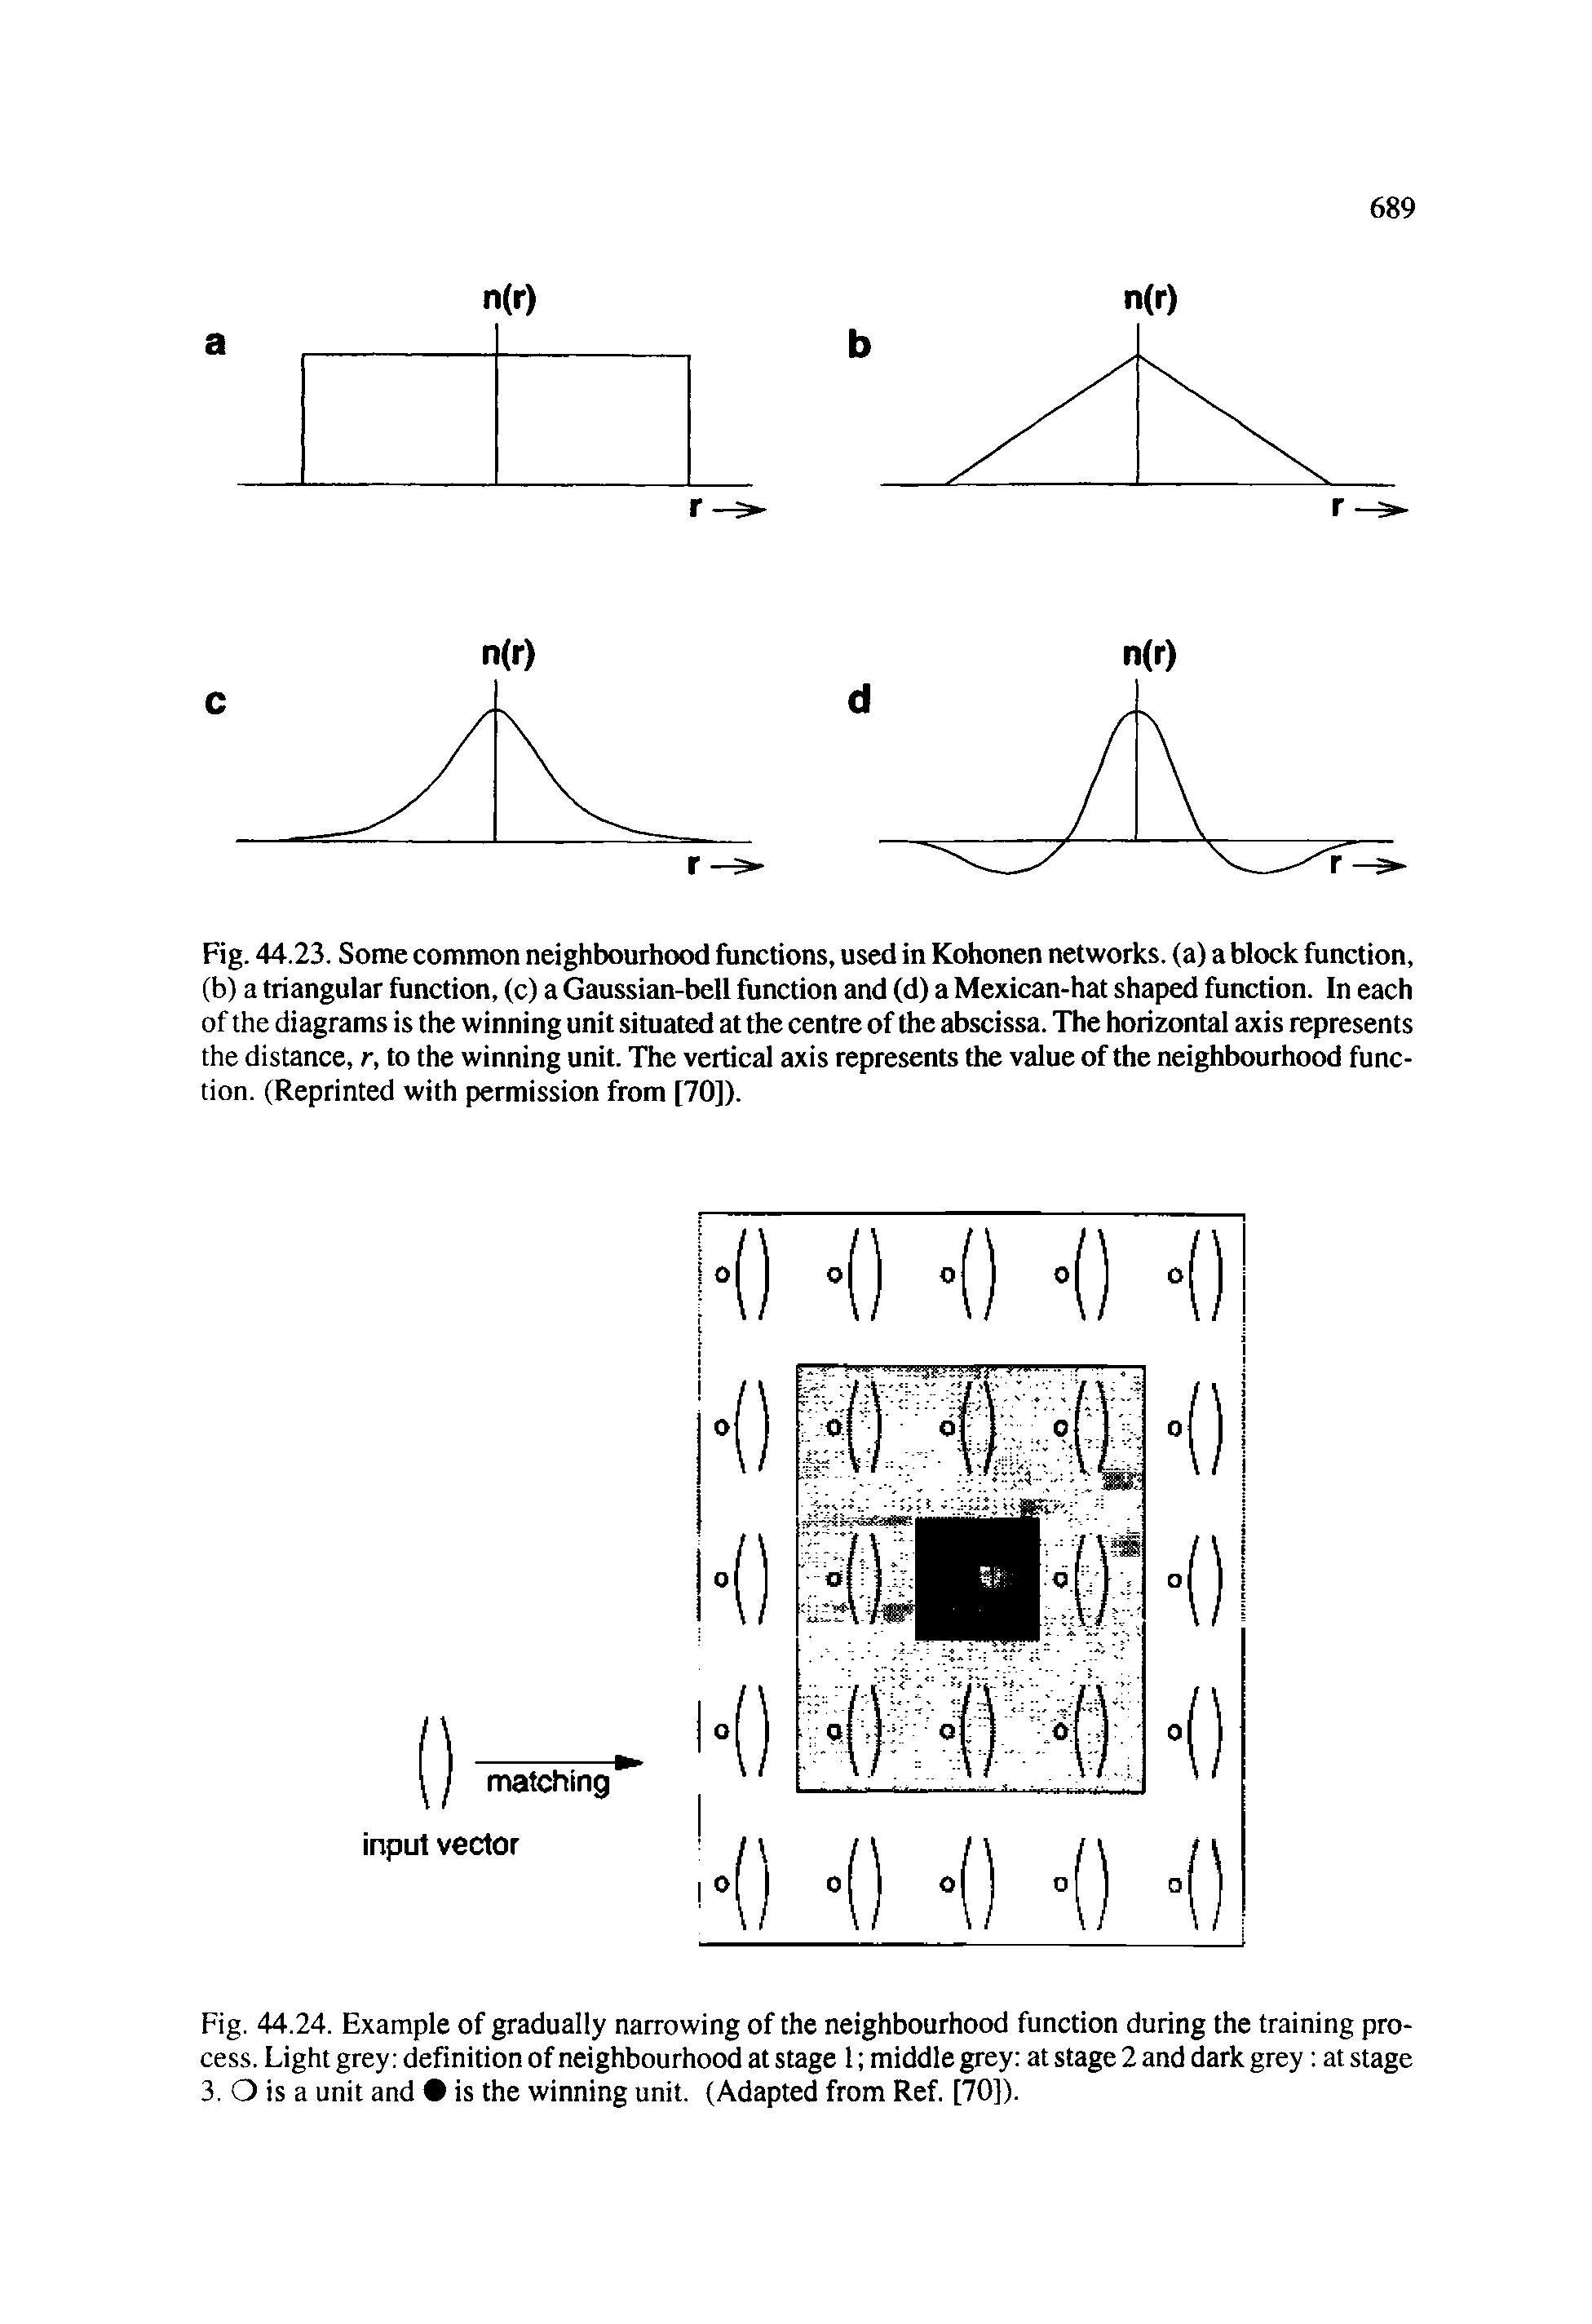 Fig. 44.23. Some common neighbourhood functions, used in Kohonen networks, (a) a block function, (b) a triangular function, (c) a Gaussian-bell function and (d) a Mexican-hat shaped function. In each of the diagrams is the winning unit situated at the centre of the abscissa. The horizontal axis represents the distance, r, to the winning unit. The vertical axis represents the value of the neighbourhood function. (Reprinted with permission from [70]).